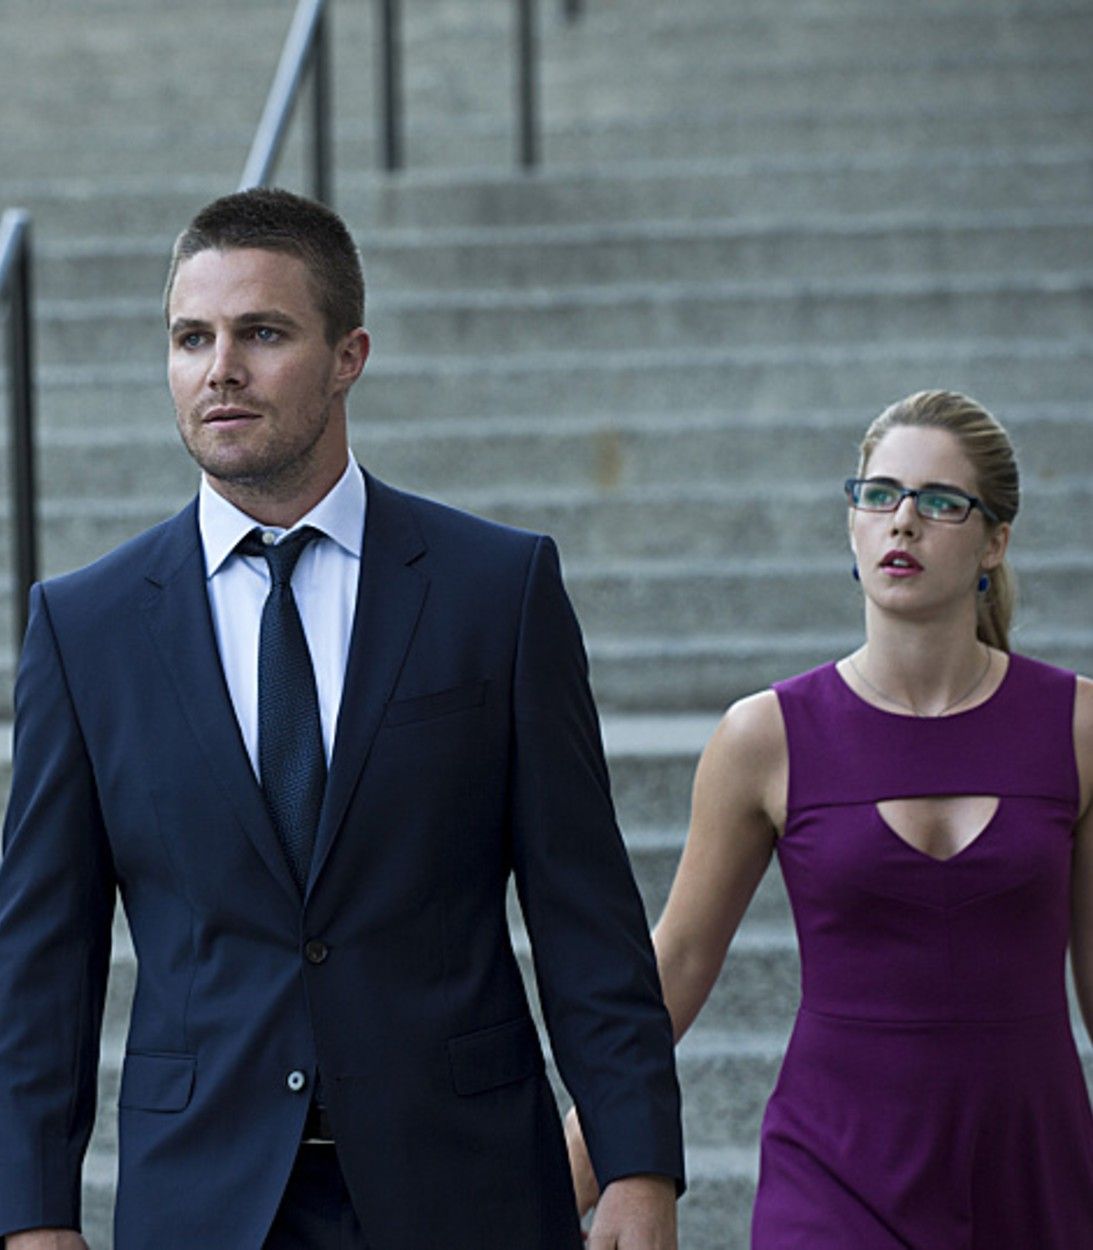 Oliver Queen and Felicity Smoak in Arrow Season 3 Premiere pic vertical